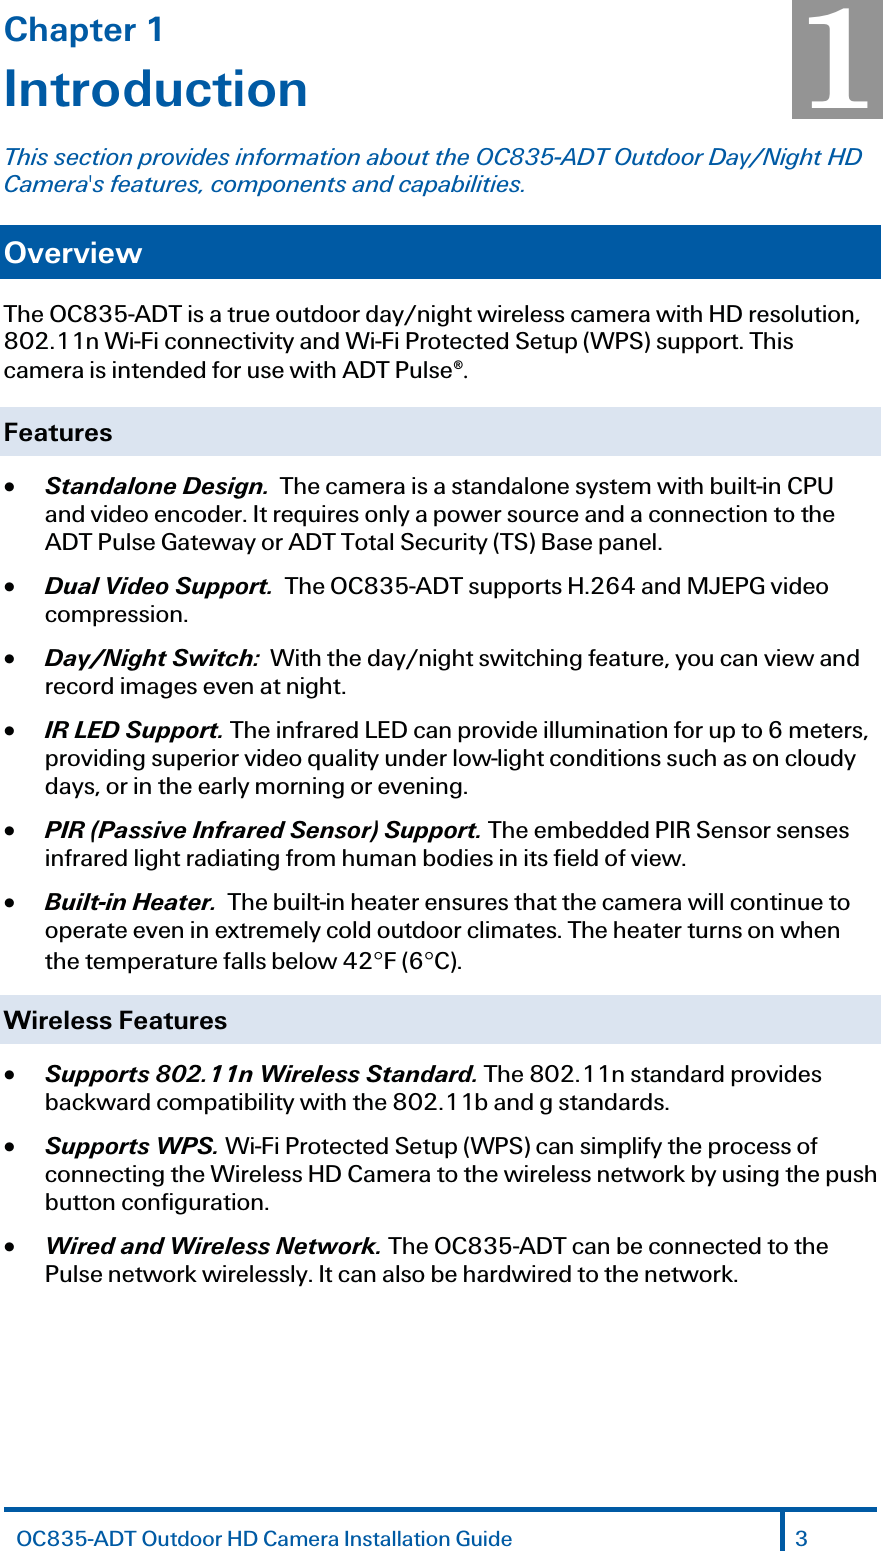 Chapter 1 Introduction This section provides information about the OC835-ADT Outdoor Day/Night HD Camera&apos;s features, components and capabilities. Overview The OC835-ADT is a true outdoor day/night wireless camera with HD resolution, 802.11n Wi-Fi connectivity and Wi-Fi Protected Setup (WPS) support. This camera is intended for use with ADT Pulse®. Features x Standalone Design.  The camera is a standalone system with built-in CPU and video encoder. It requires only a power source and a connection to the ADT Pulse Gateway or ADT Total Security (TS) Base panel. x Dual Video Support.  The OC835-ADT supports H.264 and MJEPG video compression. x Day/Night Switch:  With the day/night switching feature, you can view and record images even at night. x IR LED Support. The infrared LED can provide illumination for up to 6 meters, providing superior video quality under low-light conditions such as on cloudy days, or in the early morning or evening.  x PIR (Passive Infrared Sensor) Support. The embedded PIR Sensor senses infrared light radiating from human bodies in its field of view. x Built-in Heater.  The built-in heater ensures that the camera will continue to operate even in extremely cold outdoor climates. The heater turns on when the temperature falls below 42qF (6qC). Wireless Features  x Supports 802.11n Wireless Standard. The 802.11n standard provides backward compatibility with the 802.11b and g standards. x Supports WPS. Wi-Fi Protected Setup (WPS) can simplify the process of connecting the Wireless HD Camera to the wireless network by using the push button configuration. x Wired and Wireless Network. The OC835-ADT can be connected to the Pulse network wirelessly. It can also be hardwired to the network. 1 OC835-ADT Outdoor HD Camera Installation Guide 3  